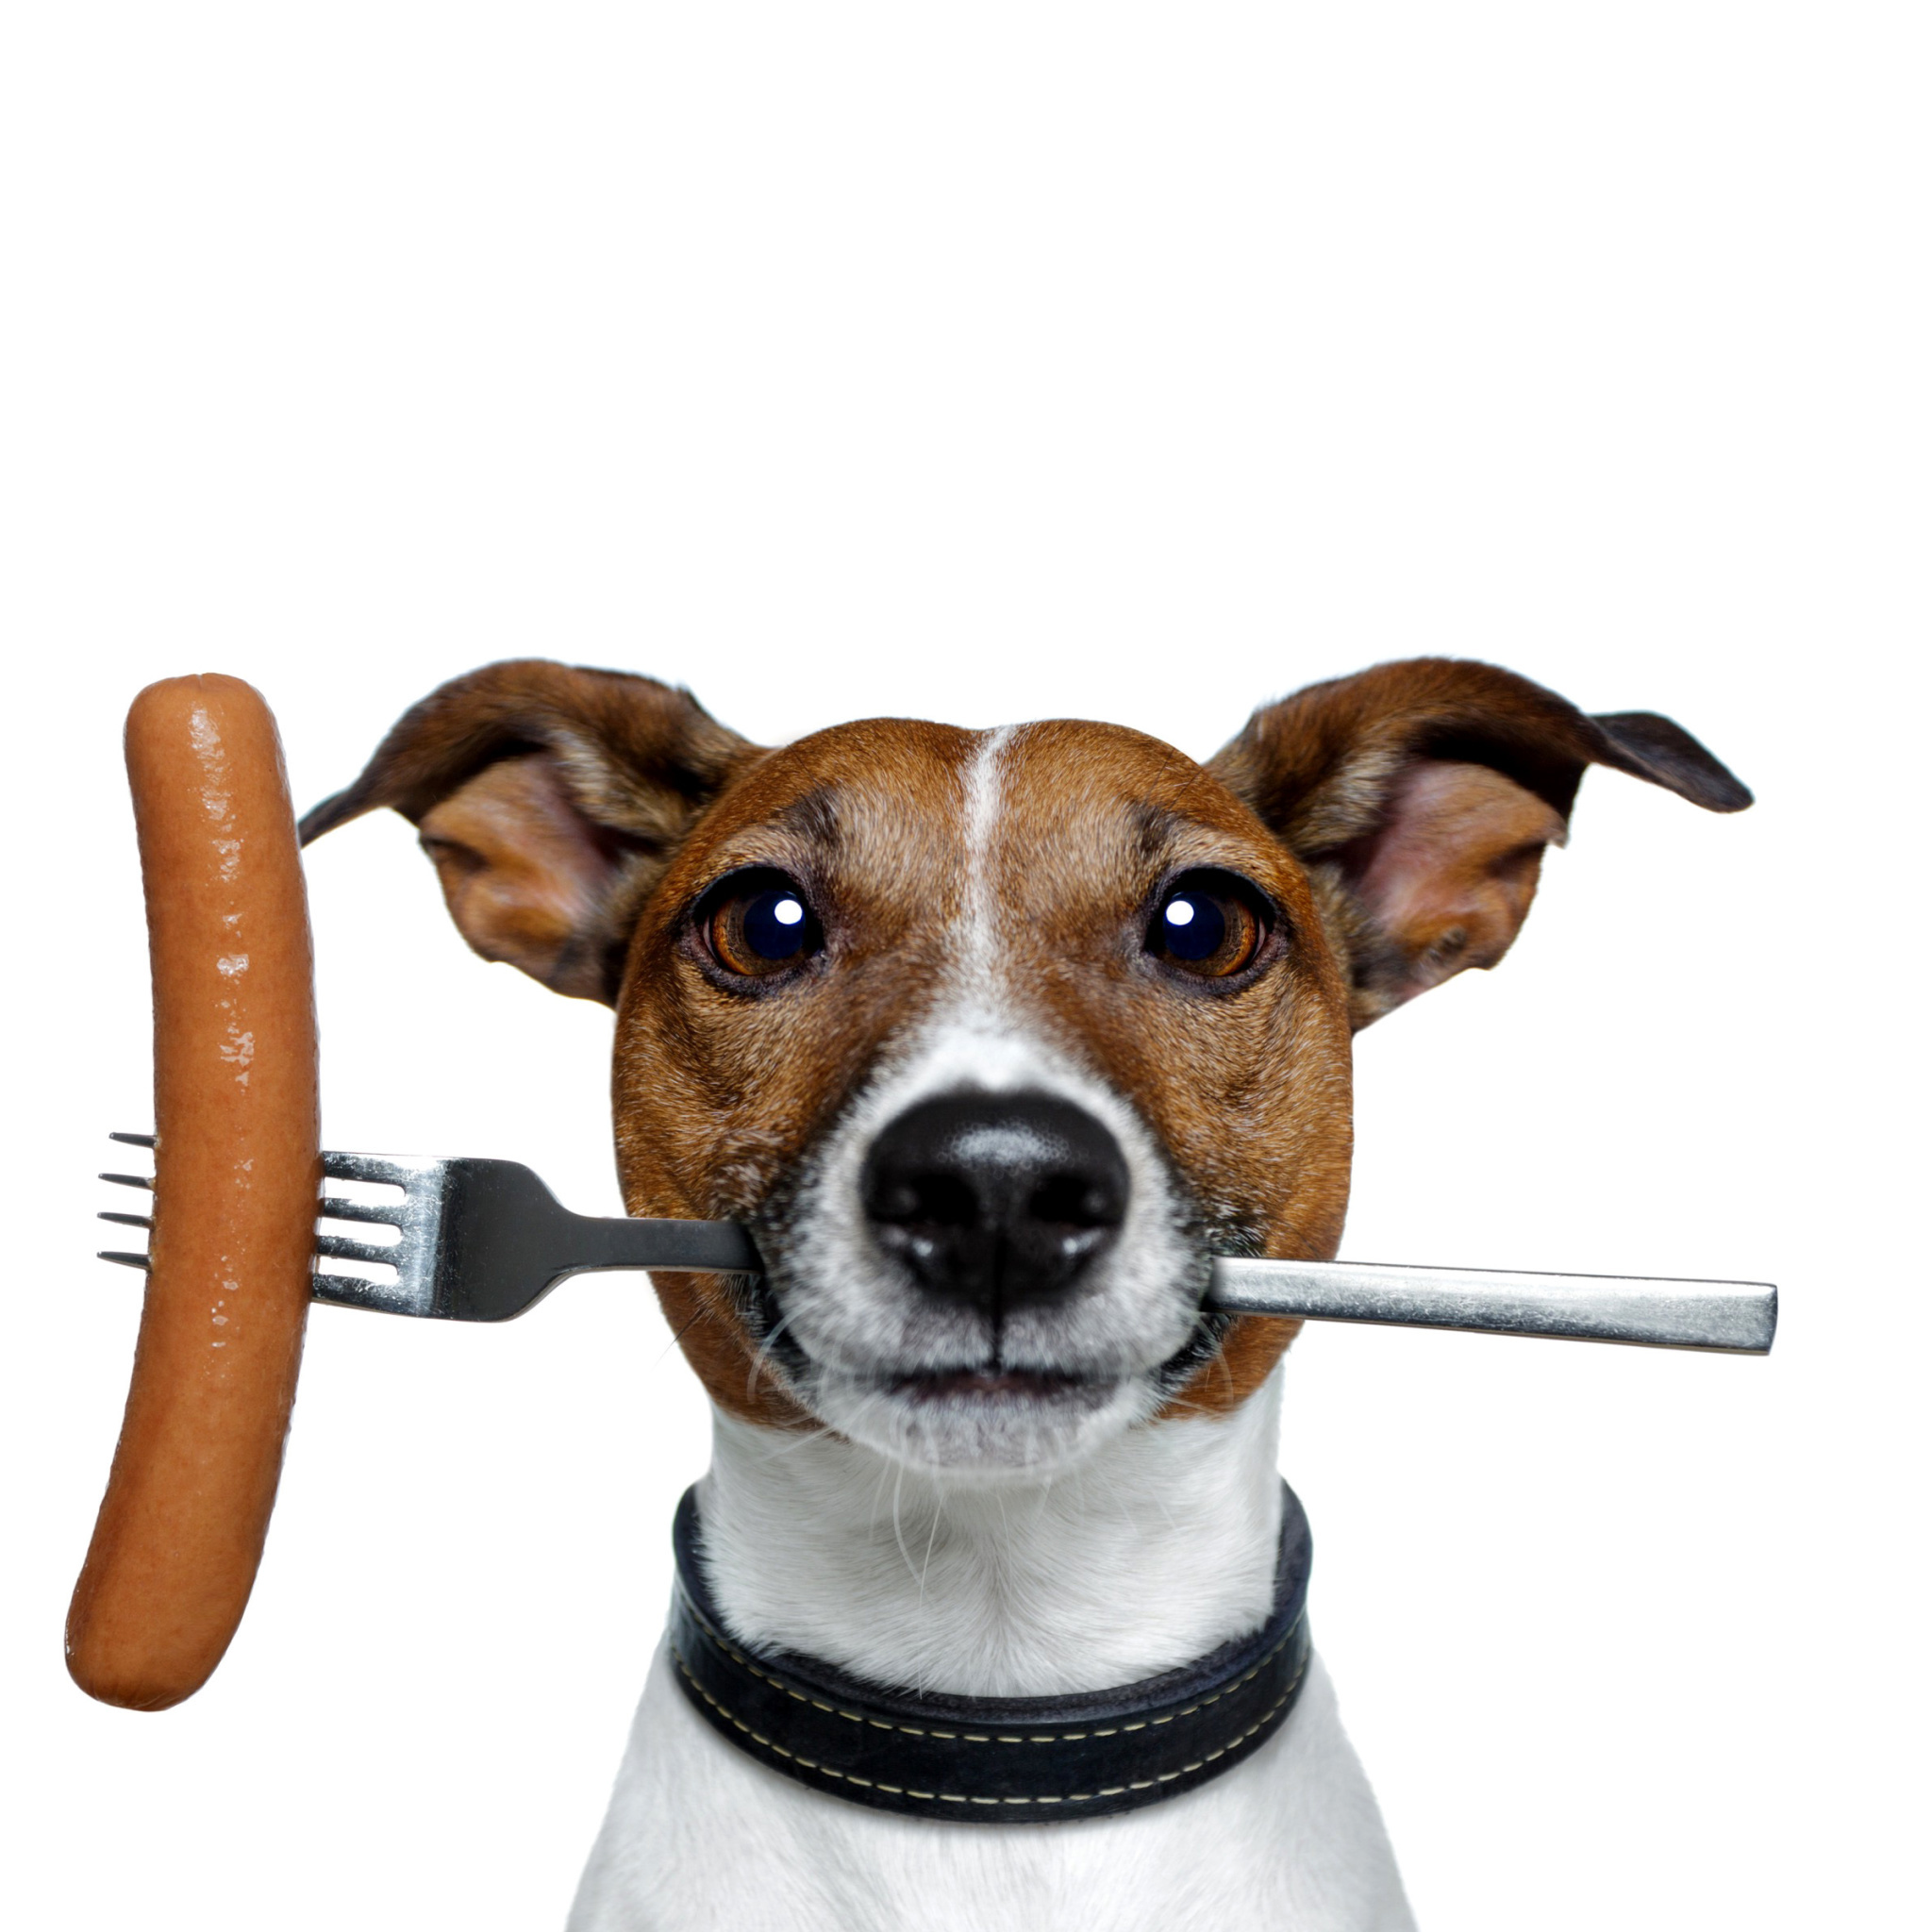 Dog with sausage wallpaper 2048x2048